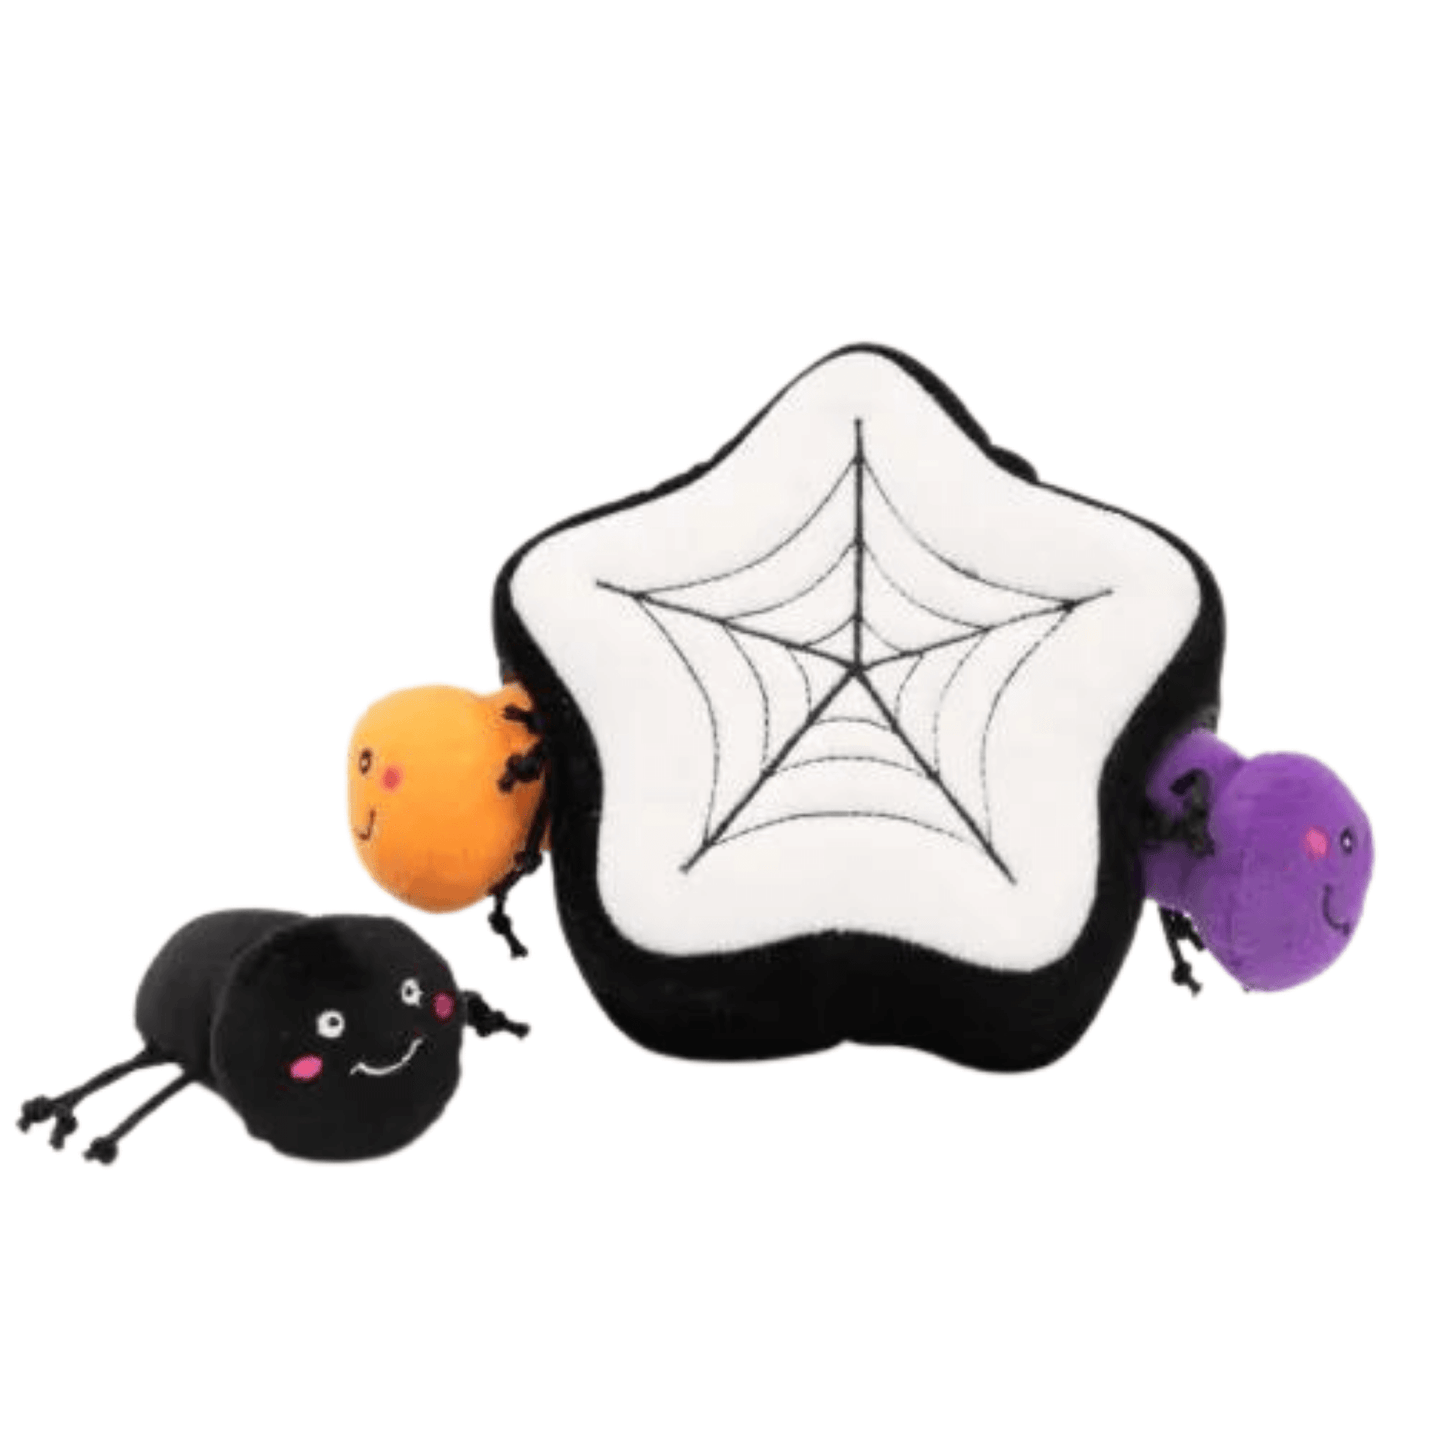 Interactive Dog Toy, spider's web with furry friendly spiders